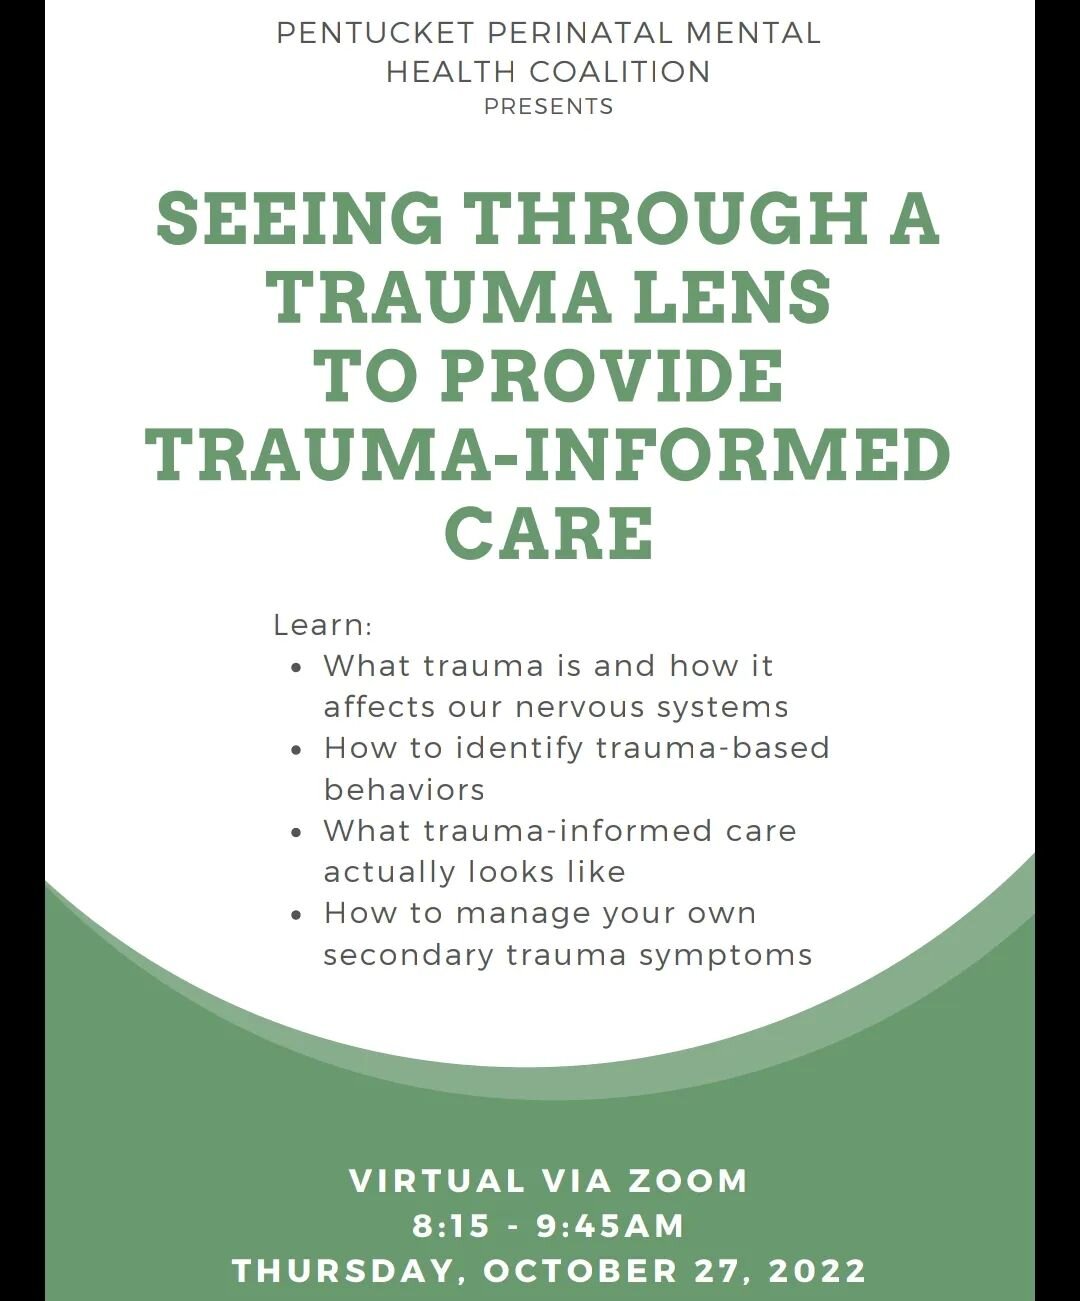 Are you a provider in the area working with the Perinatal population? We will be hosting a free virtual mini workshop on trauma-informed care + managing secondary trauma led by Beth Brown!

DM us to rsvp + for the zoom link!